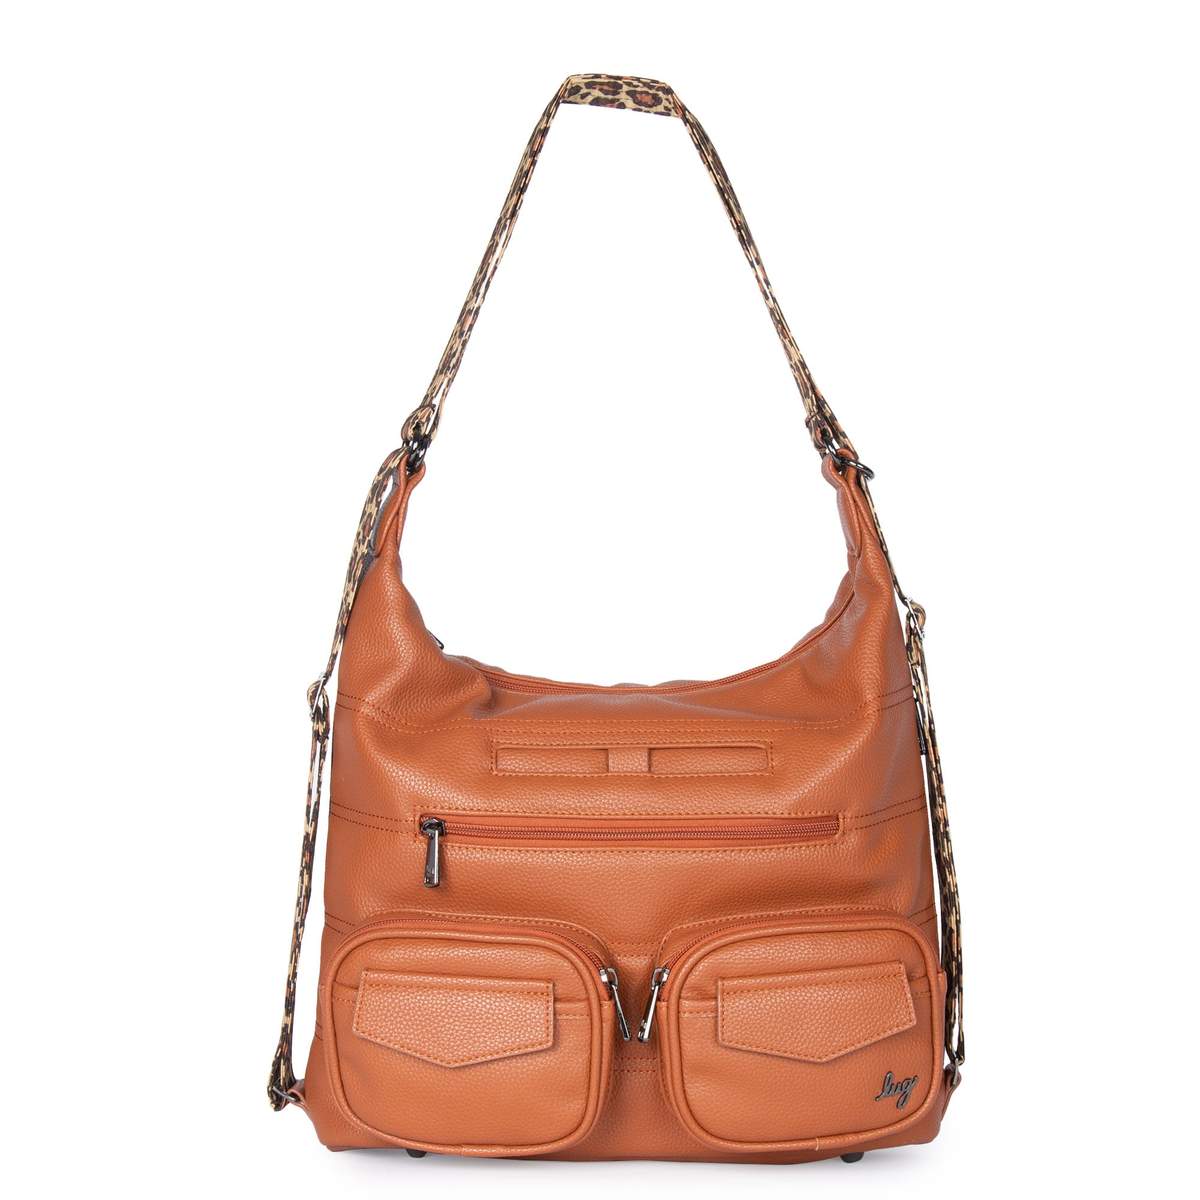 Because you loved it so much in our traditional fabrication, we had to bring it to you in Vegan Leather! Our Zipliner VL convertible hobo bag is sleek & oh-so-stylish - you won’t want to put this style down. Each solid-colored silhouette is paired with a coordinating printed adjustable strap that allows you to wear this bag as a shoulder bag or backpack.